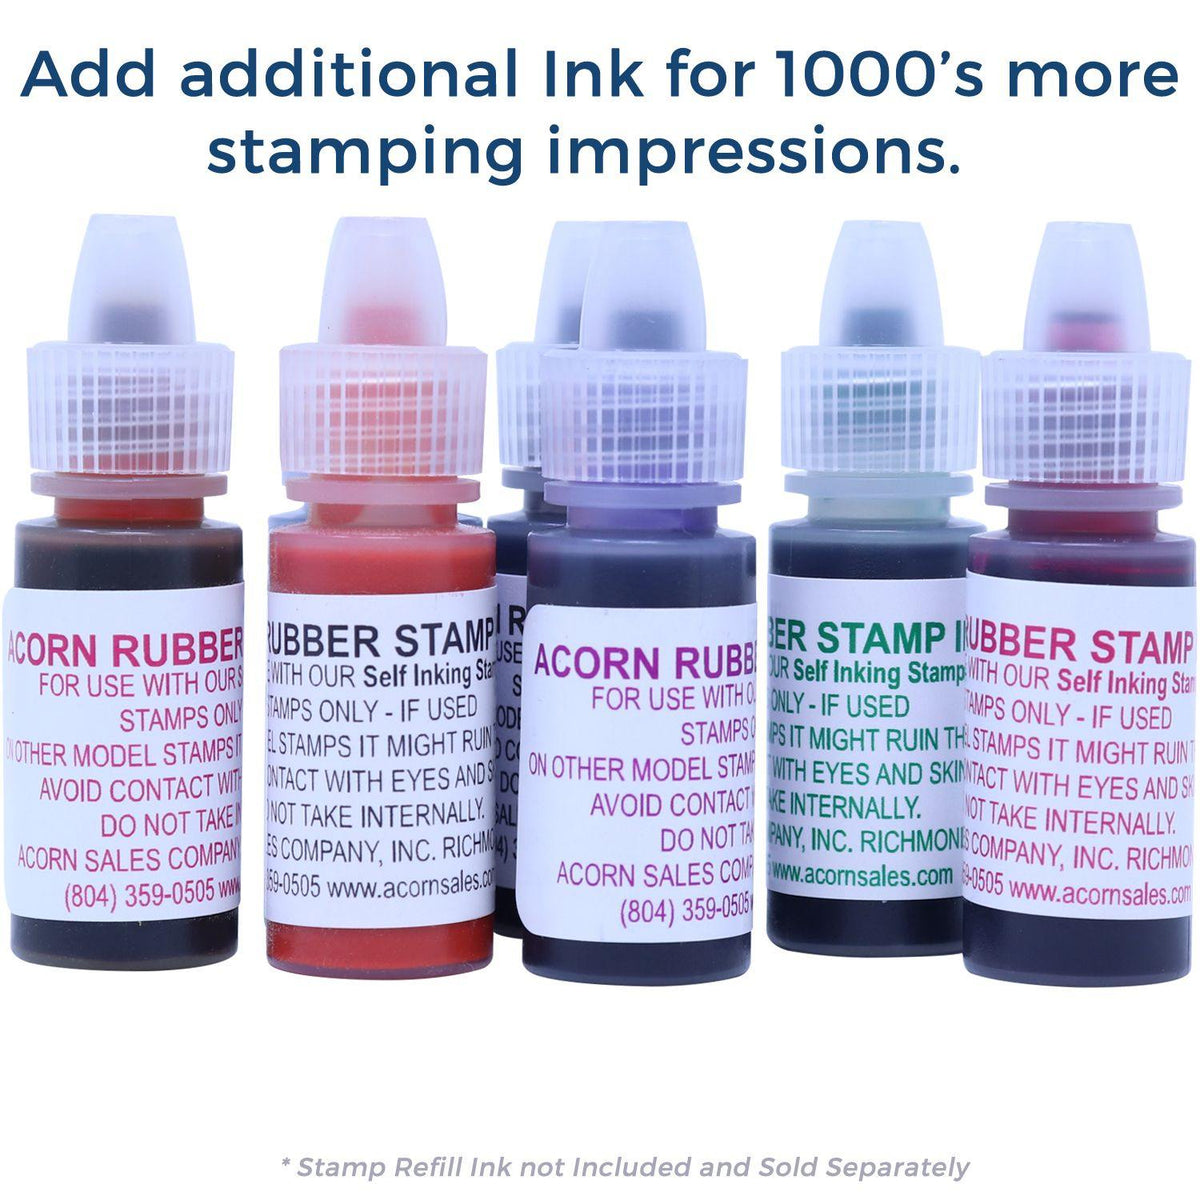 Refill Inks for Large Pre-Inked Secret Stamp Available